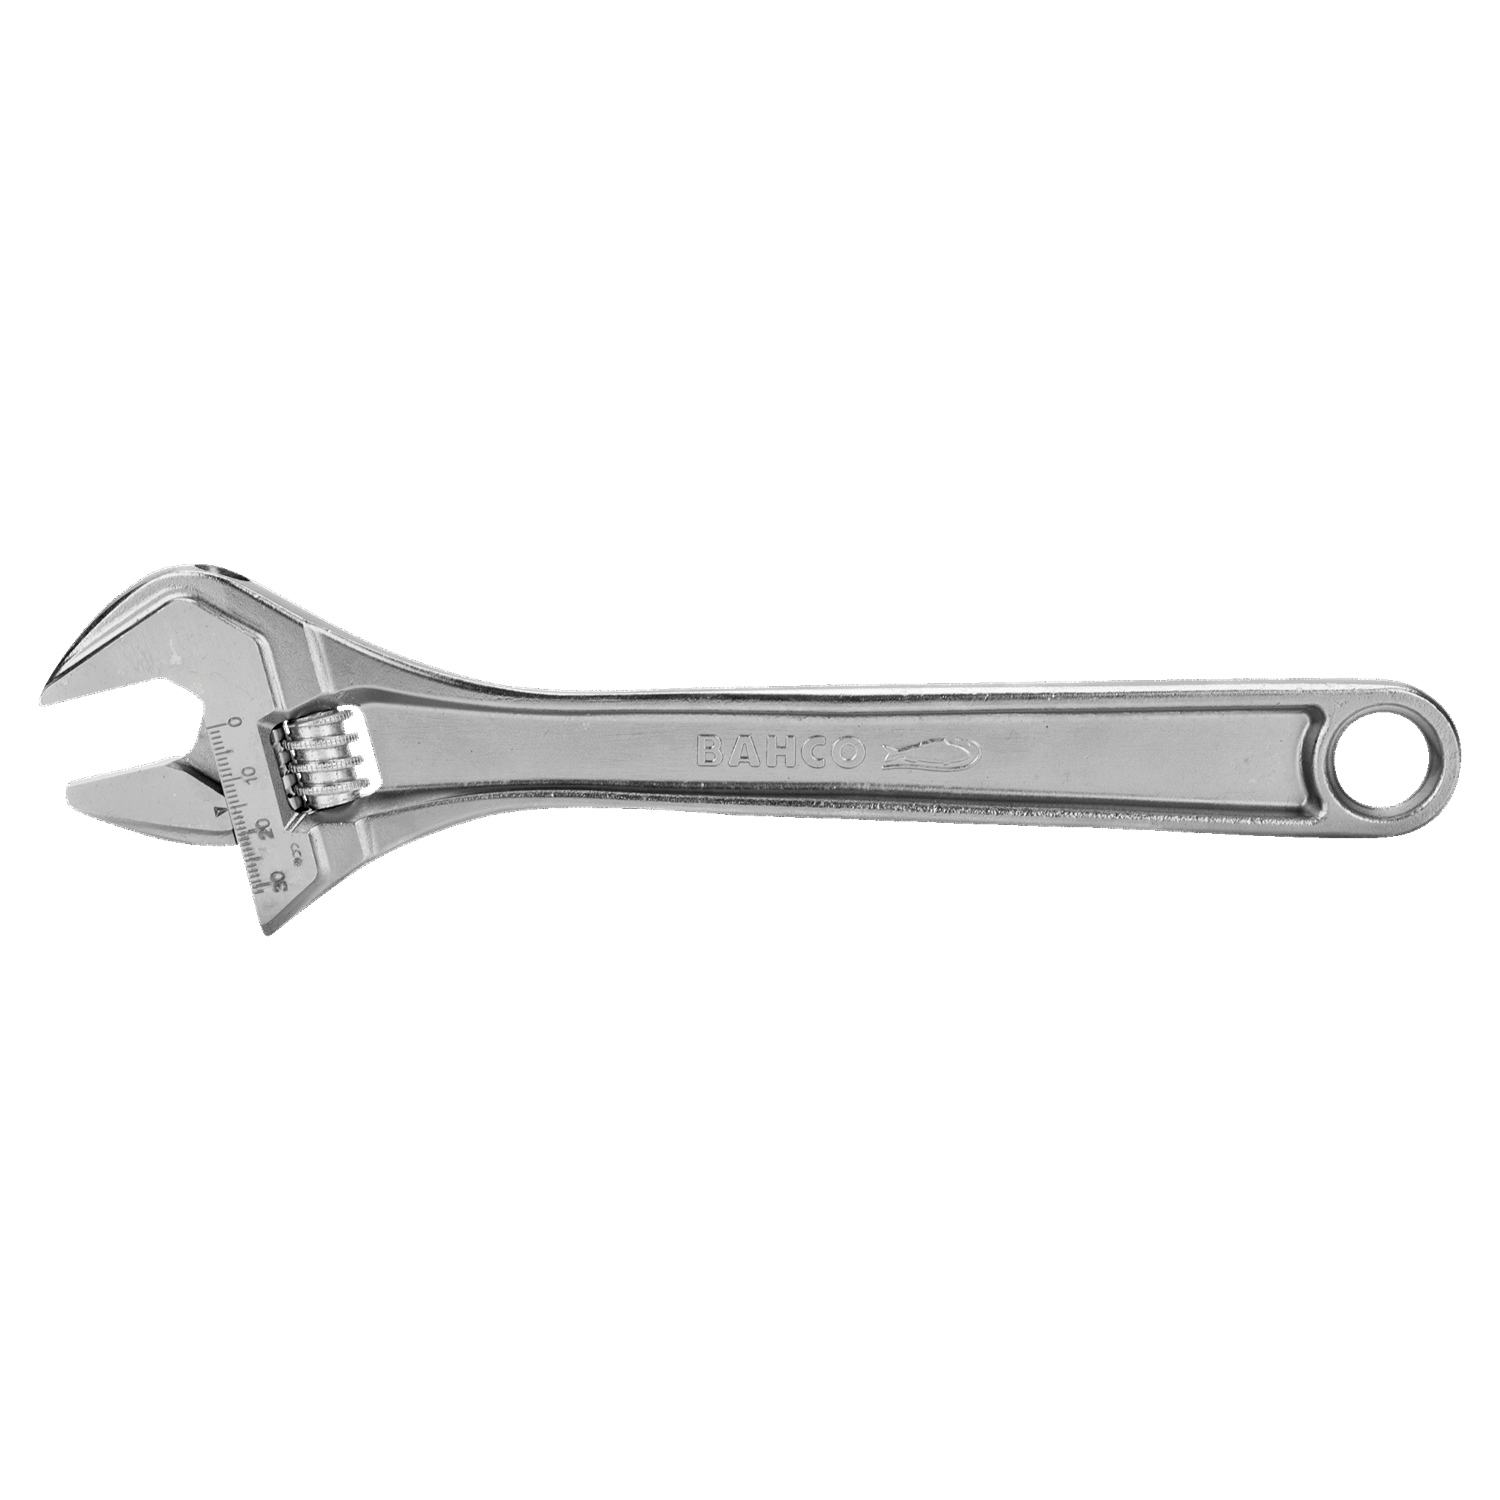 BAHCO 80C Standard Central Nut Adjustable Wrench Chrome Finish - Premium Adjustable Wrench from BAHCO - Shop now at Yew Aik.